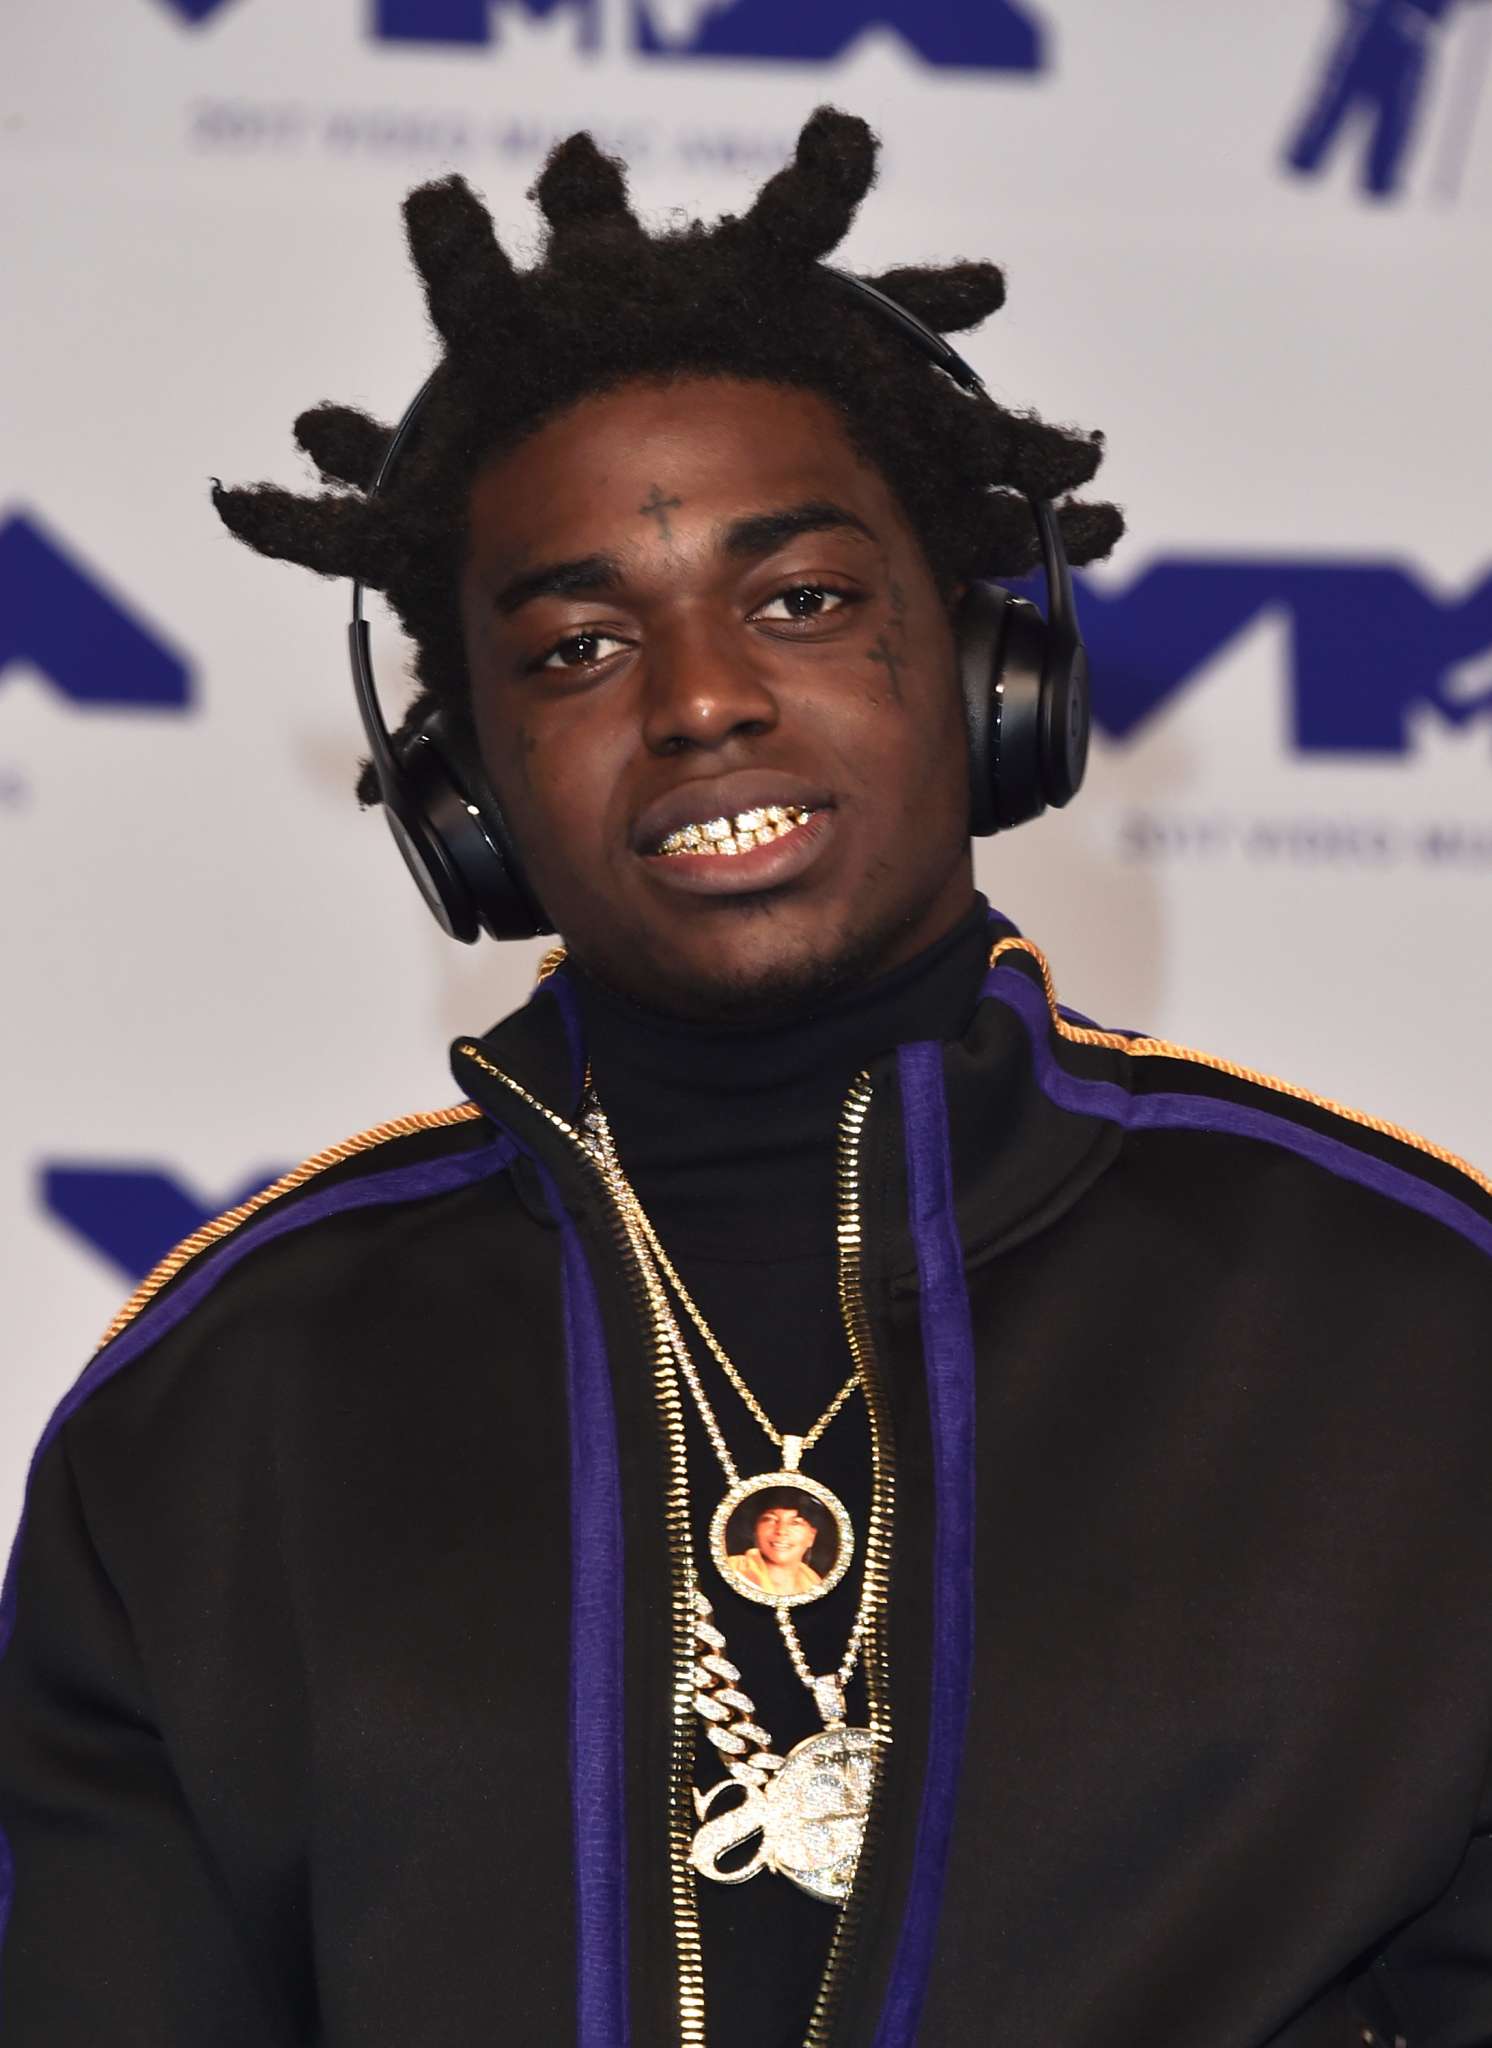 kodak-black-reassures-his-loved-ones-he-is-not-suicidal-following-latest-reports